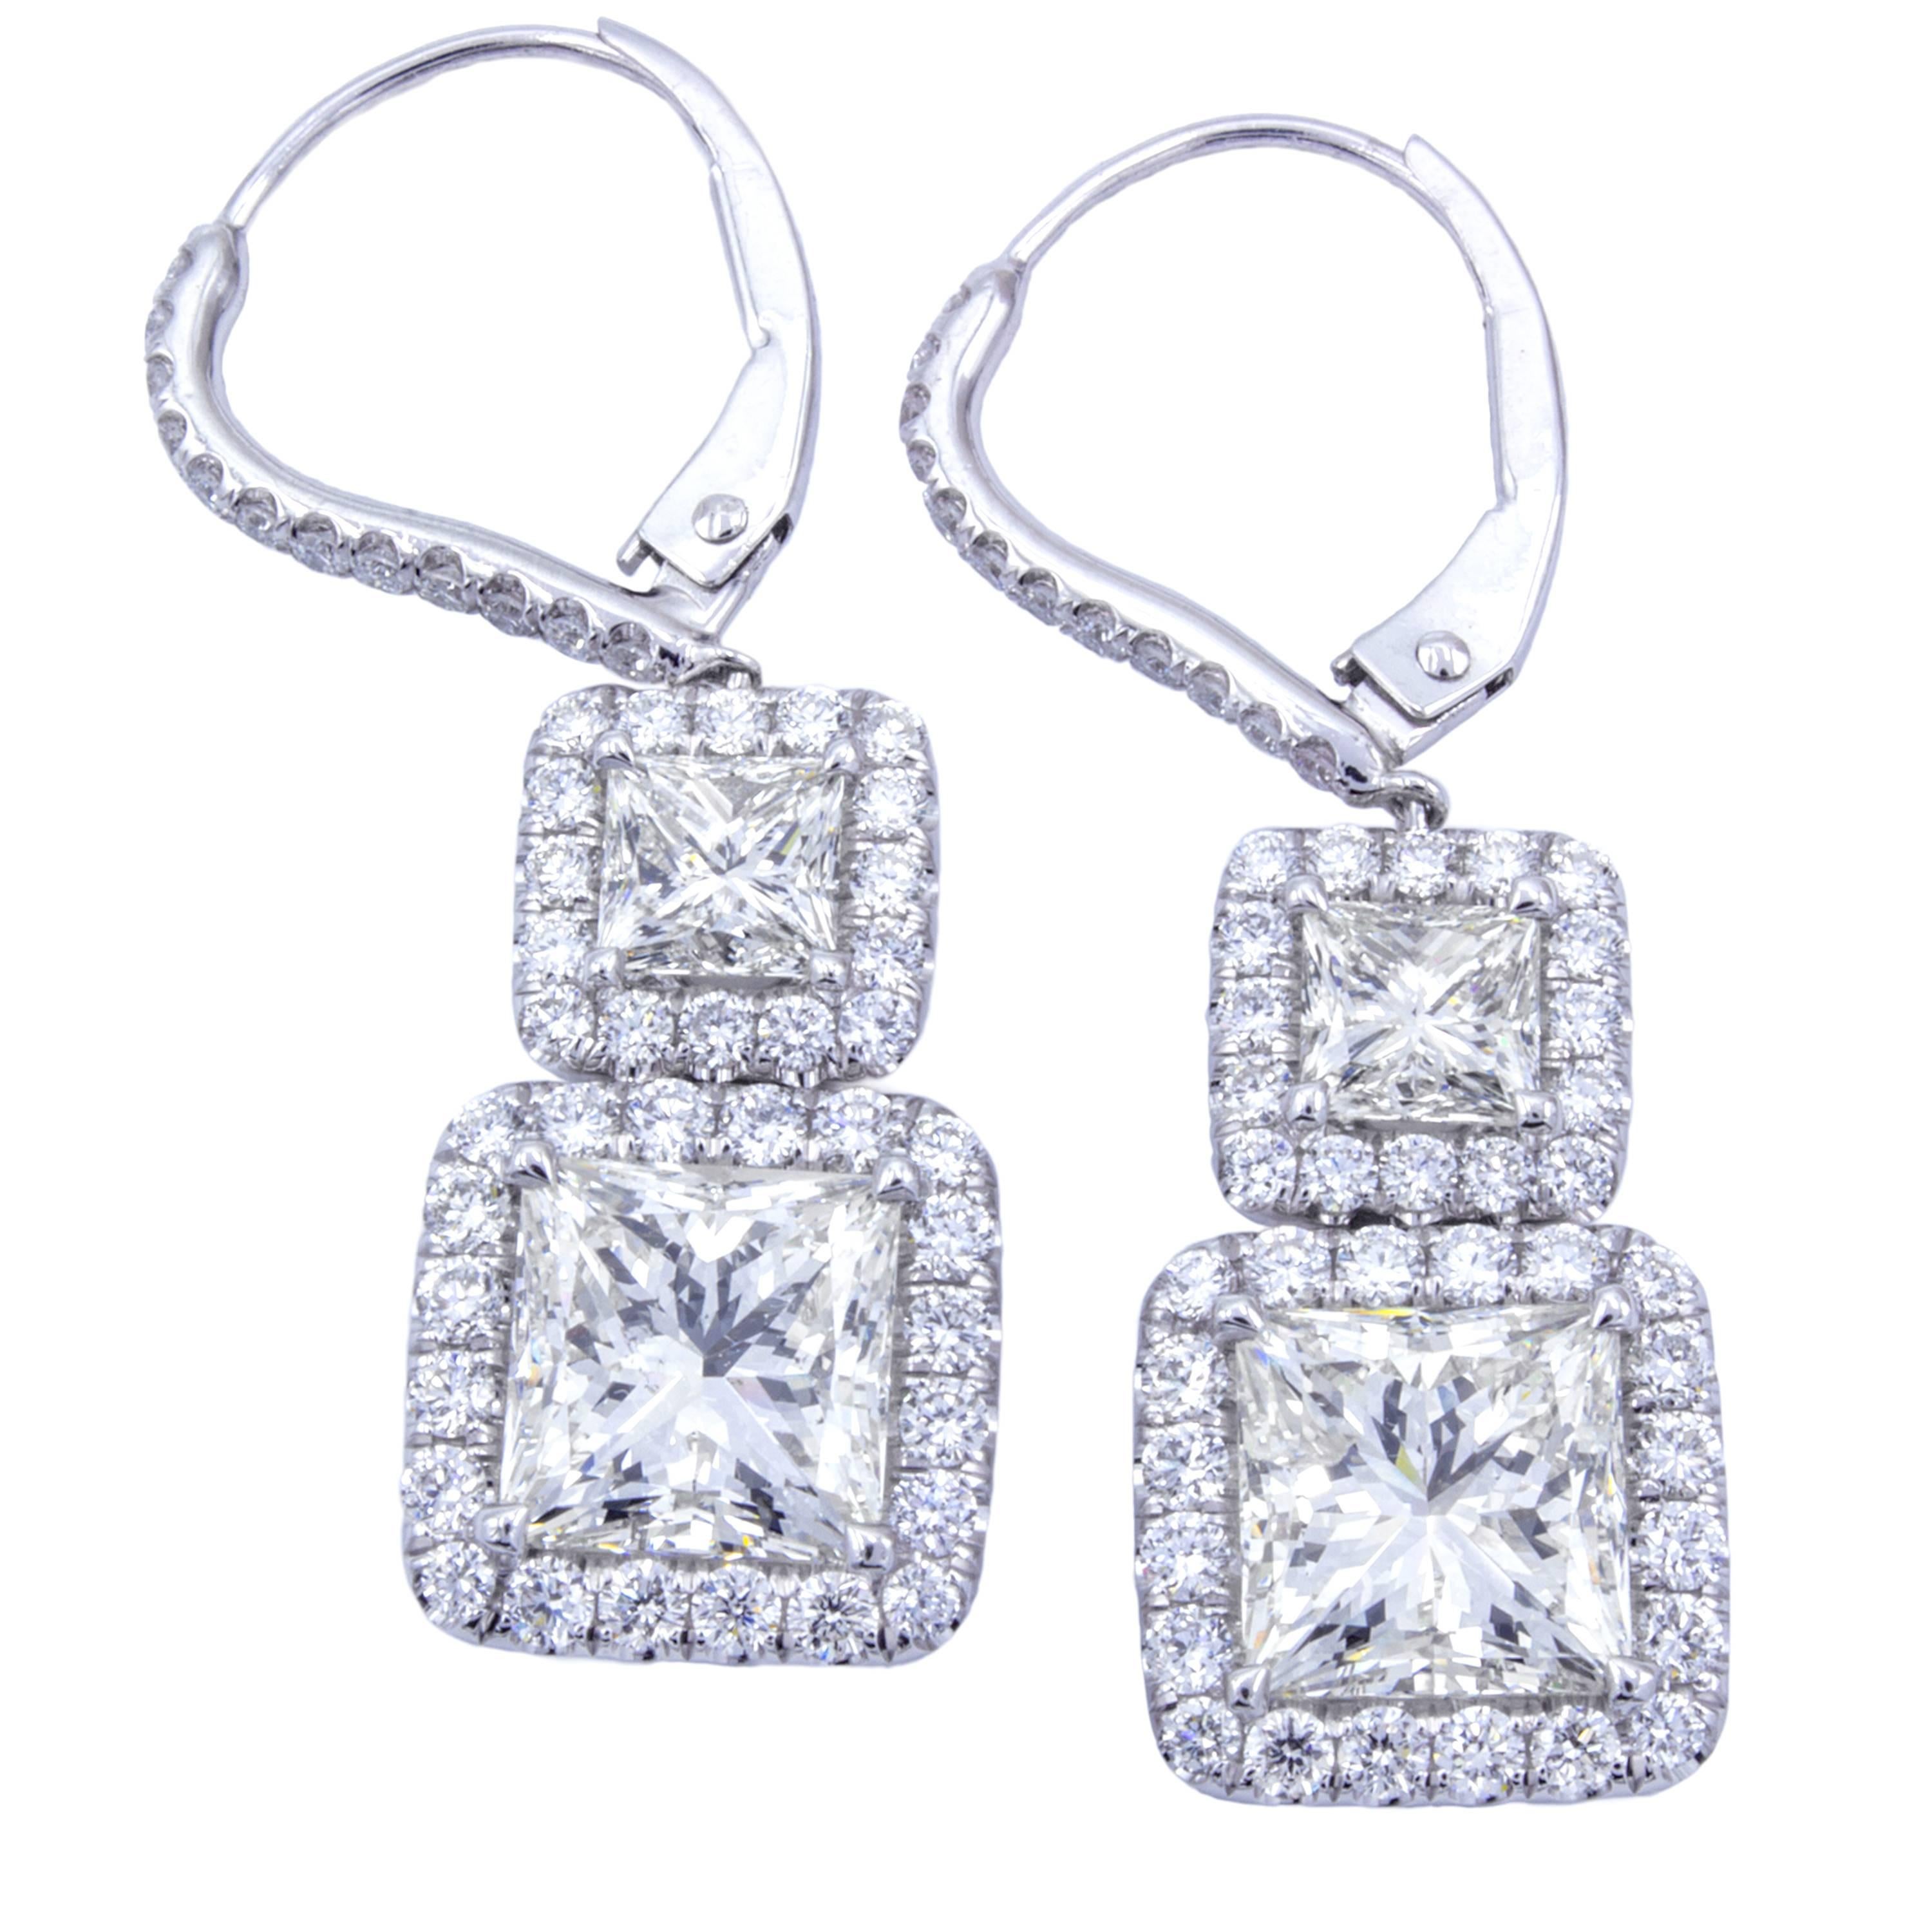 A pairing between incredibly fiery princess cut diamonds shows in a gorgeous pair of dangle drop earrings by Rosenberg Diamonds & Co. Platinum settings feature halo's of glittering round brilliant pave diamonds surrounding over 5 carats of princess